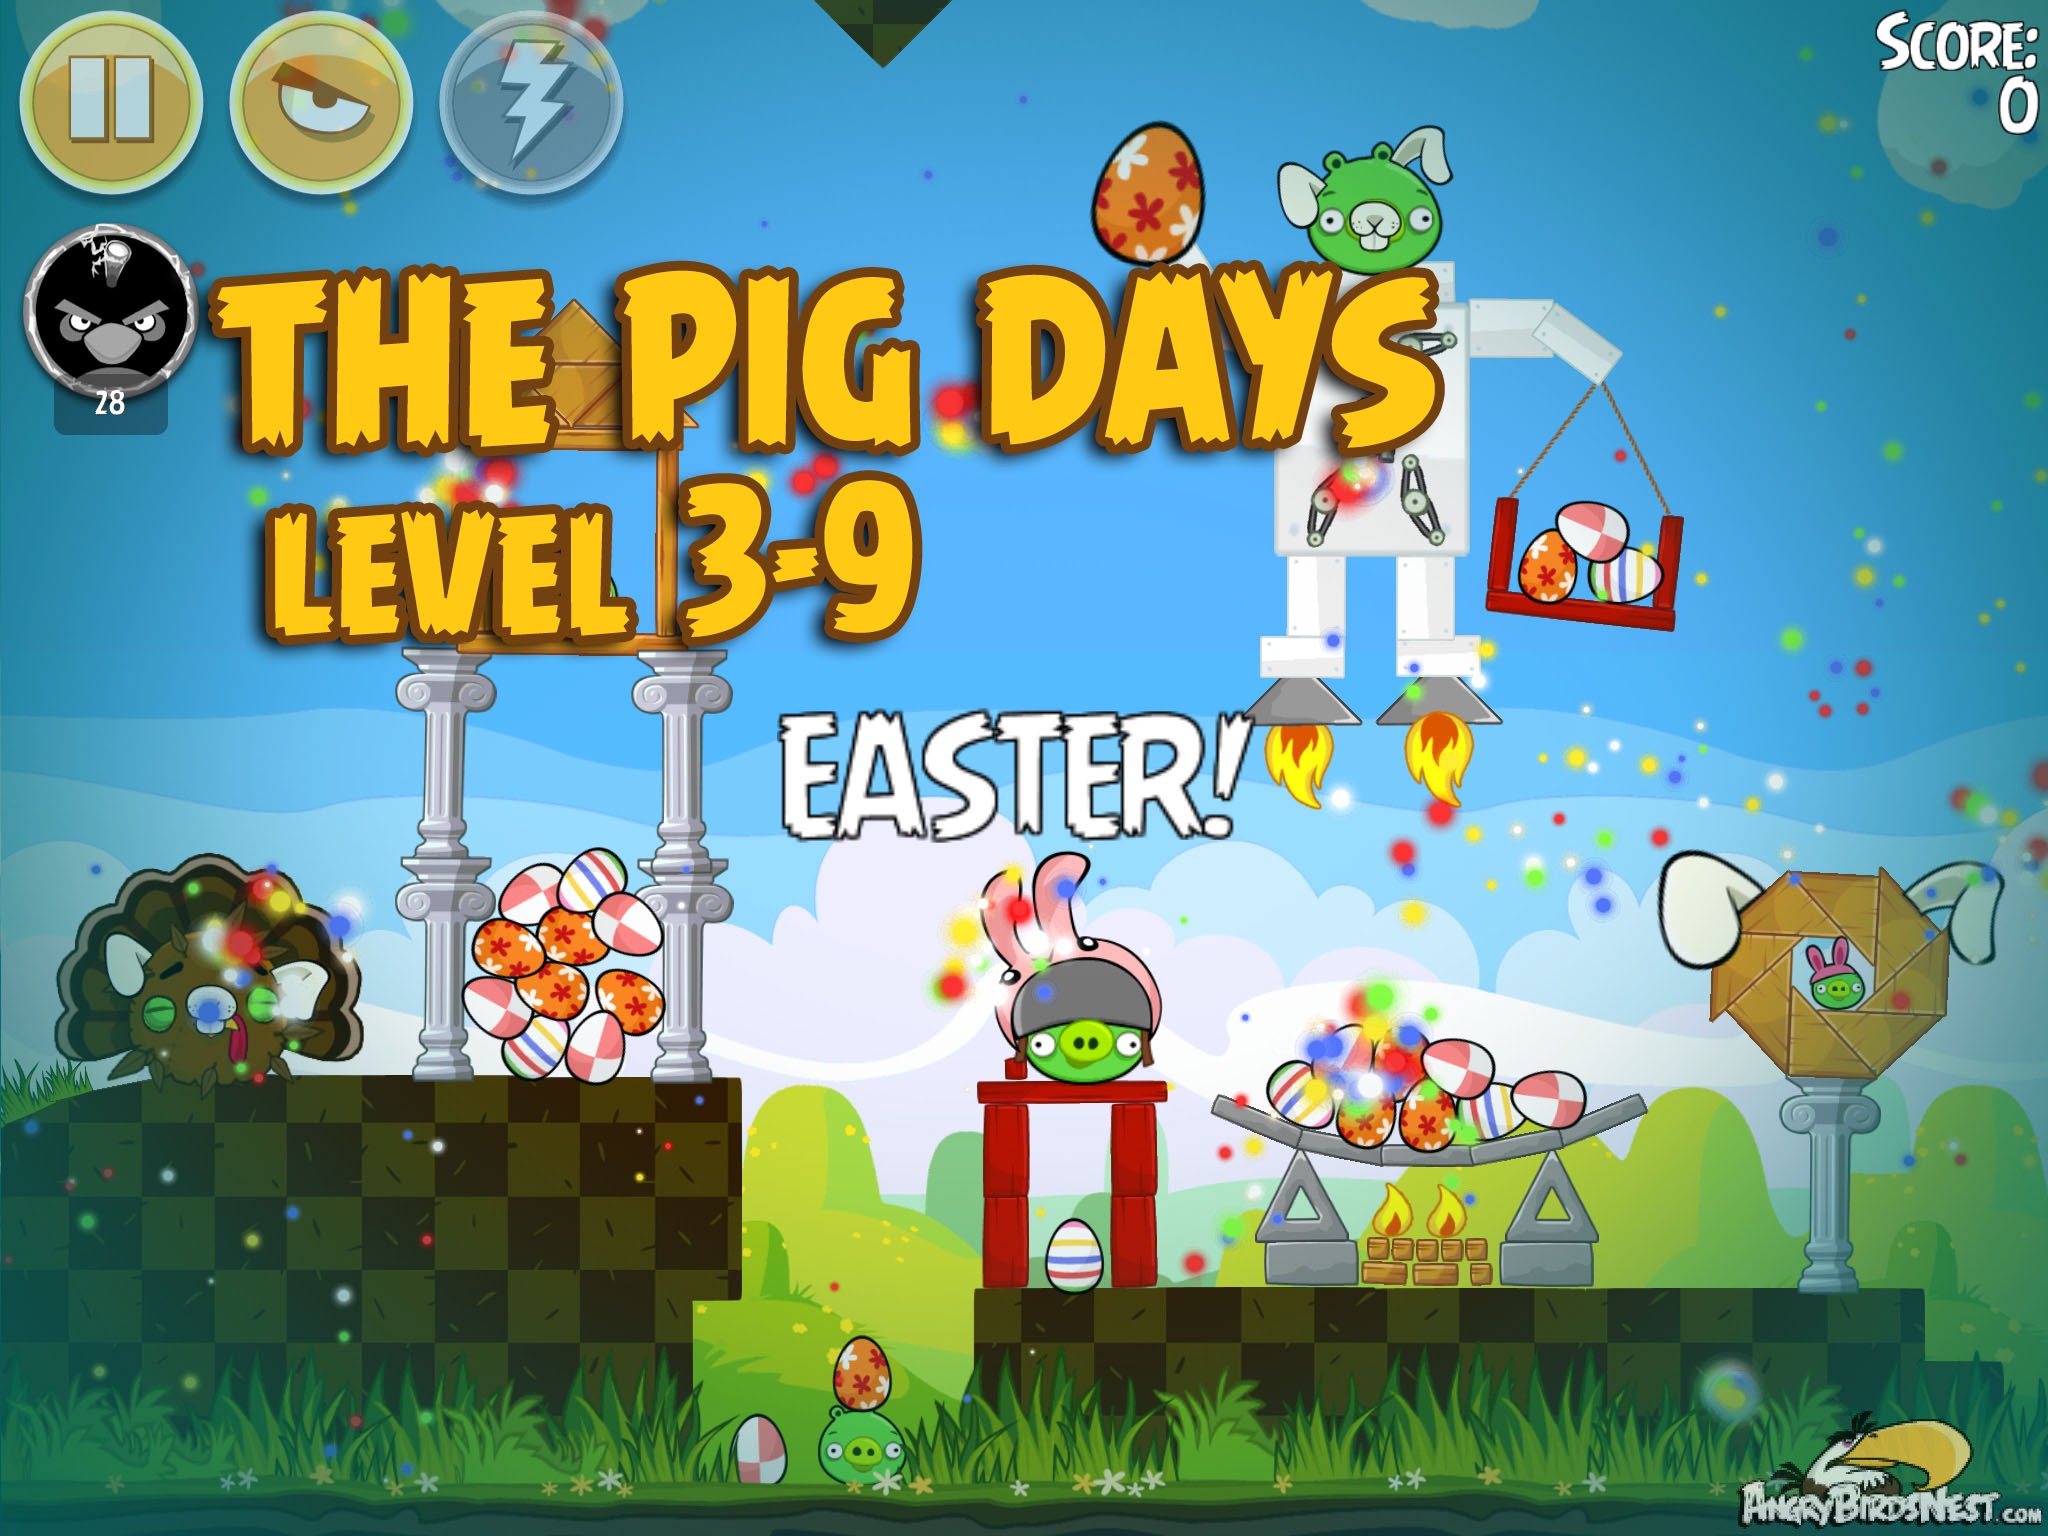 The Pig Days Level 3-9